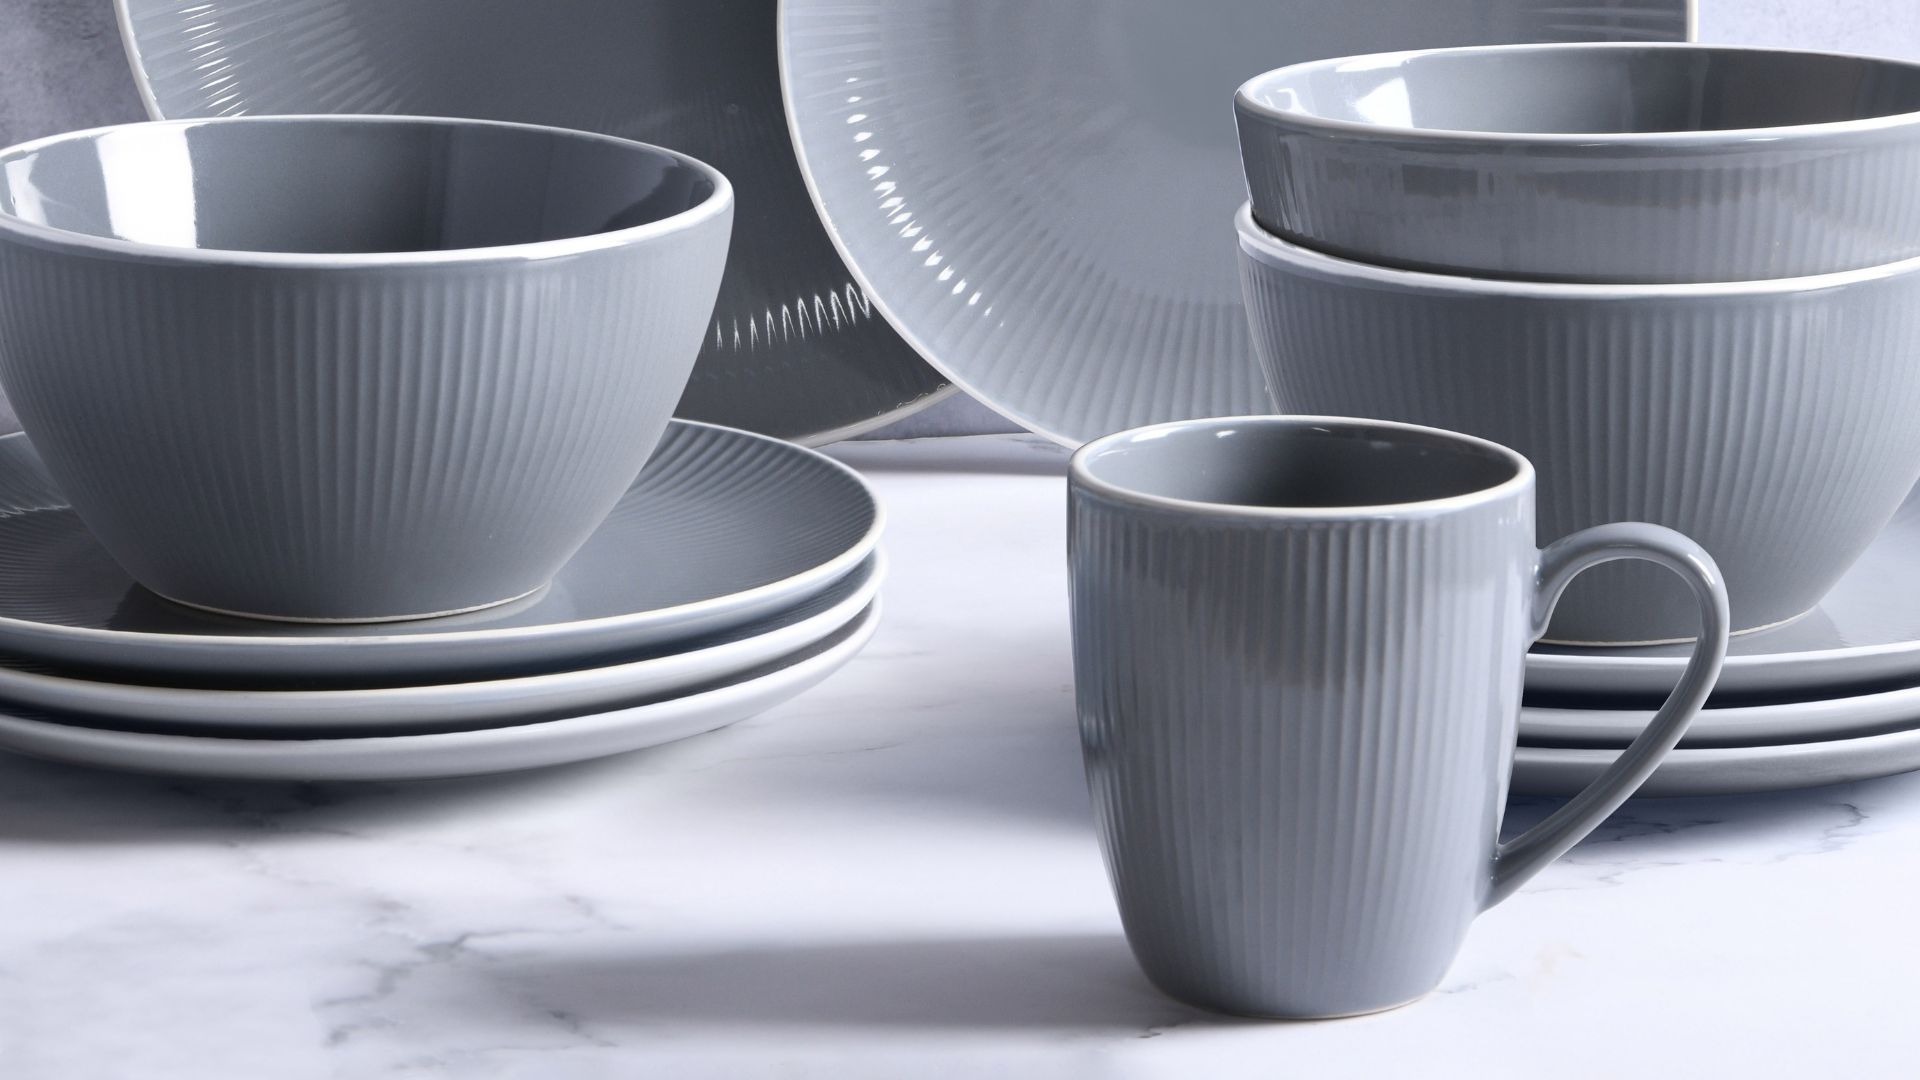 Invest in the best dinnerware at Harris Scarfe